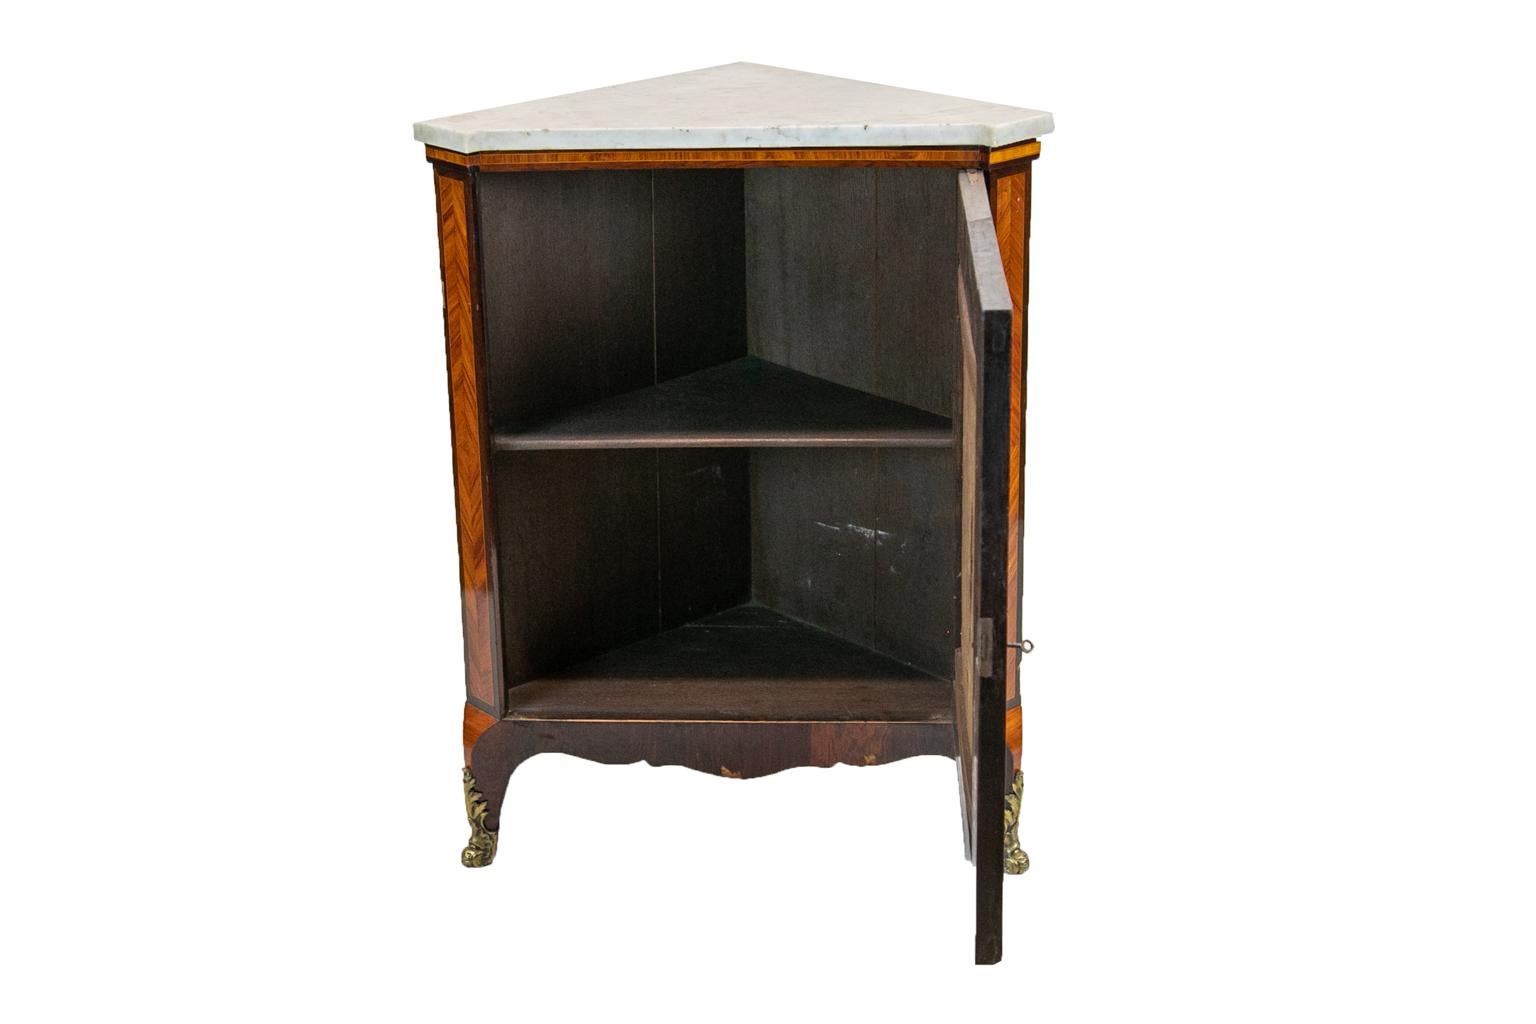 Late 19th Century English Marble-Top Inlaid Corner Cupboard For Sale